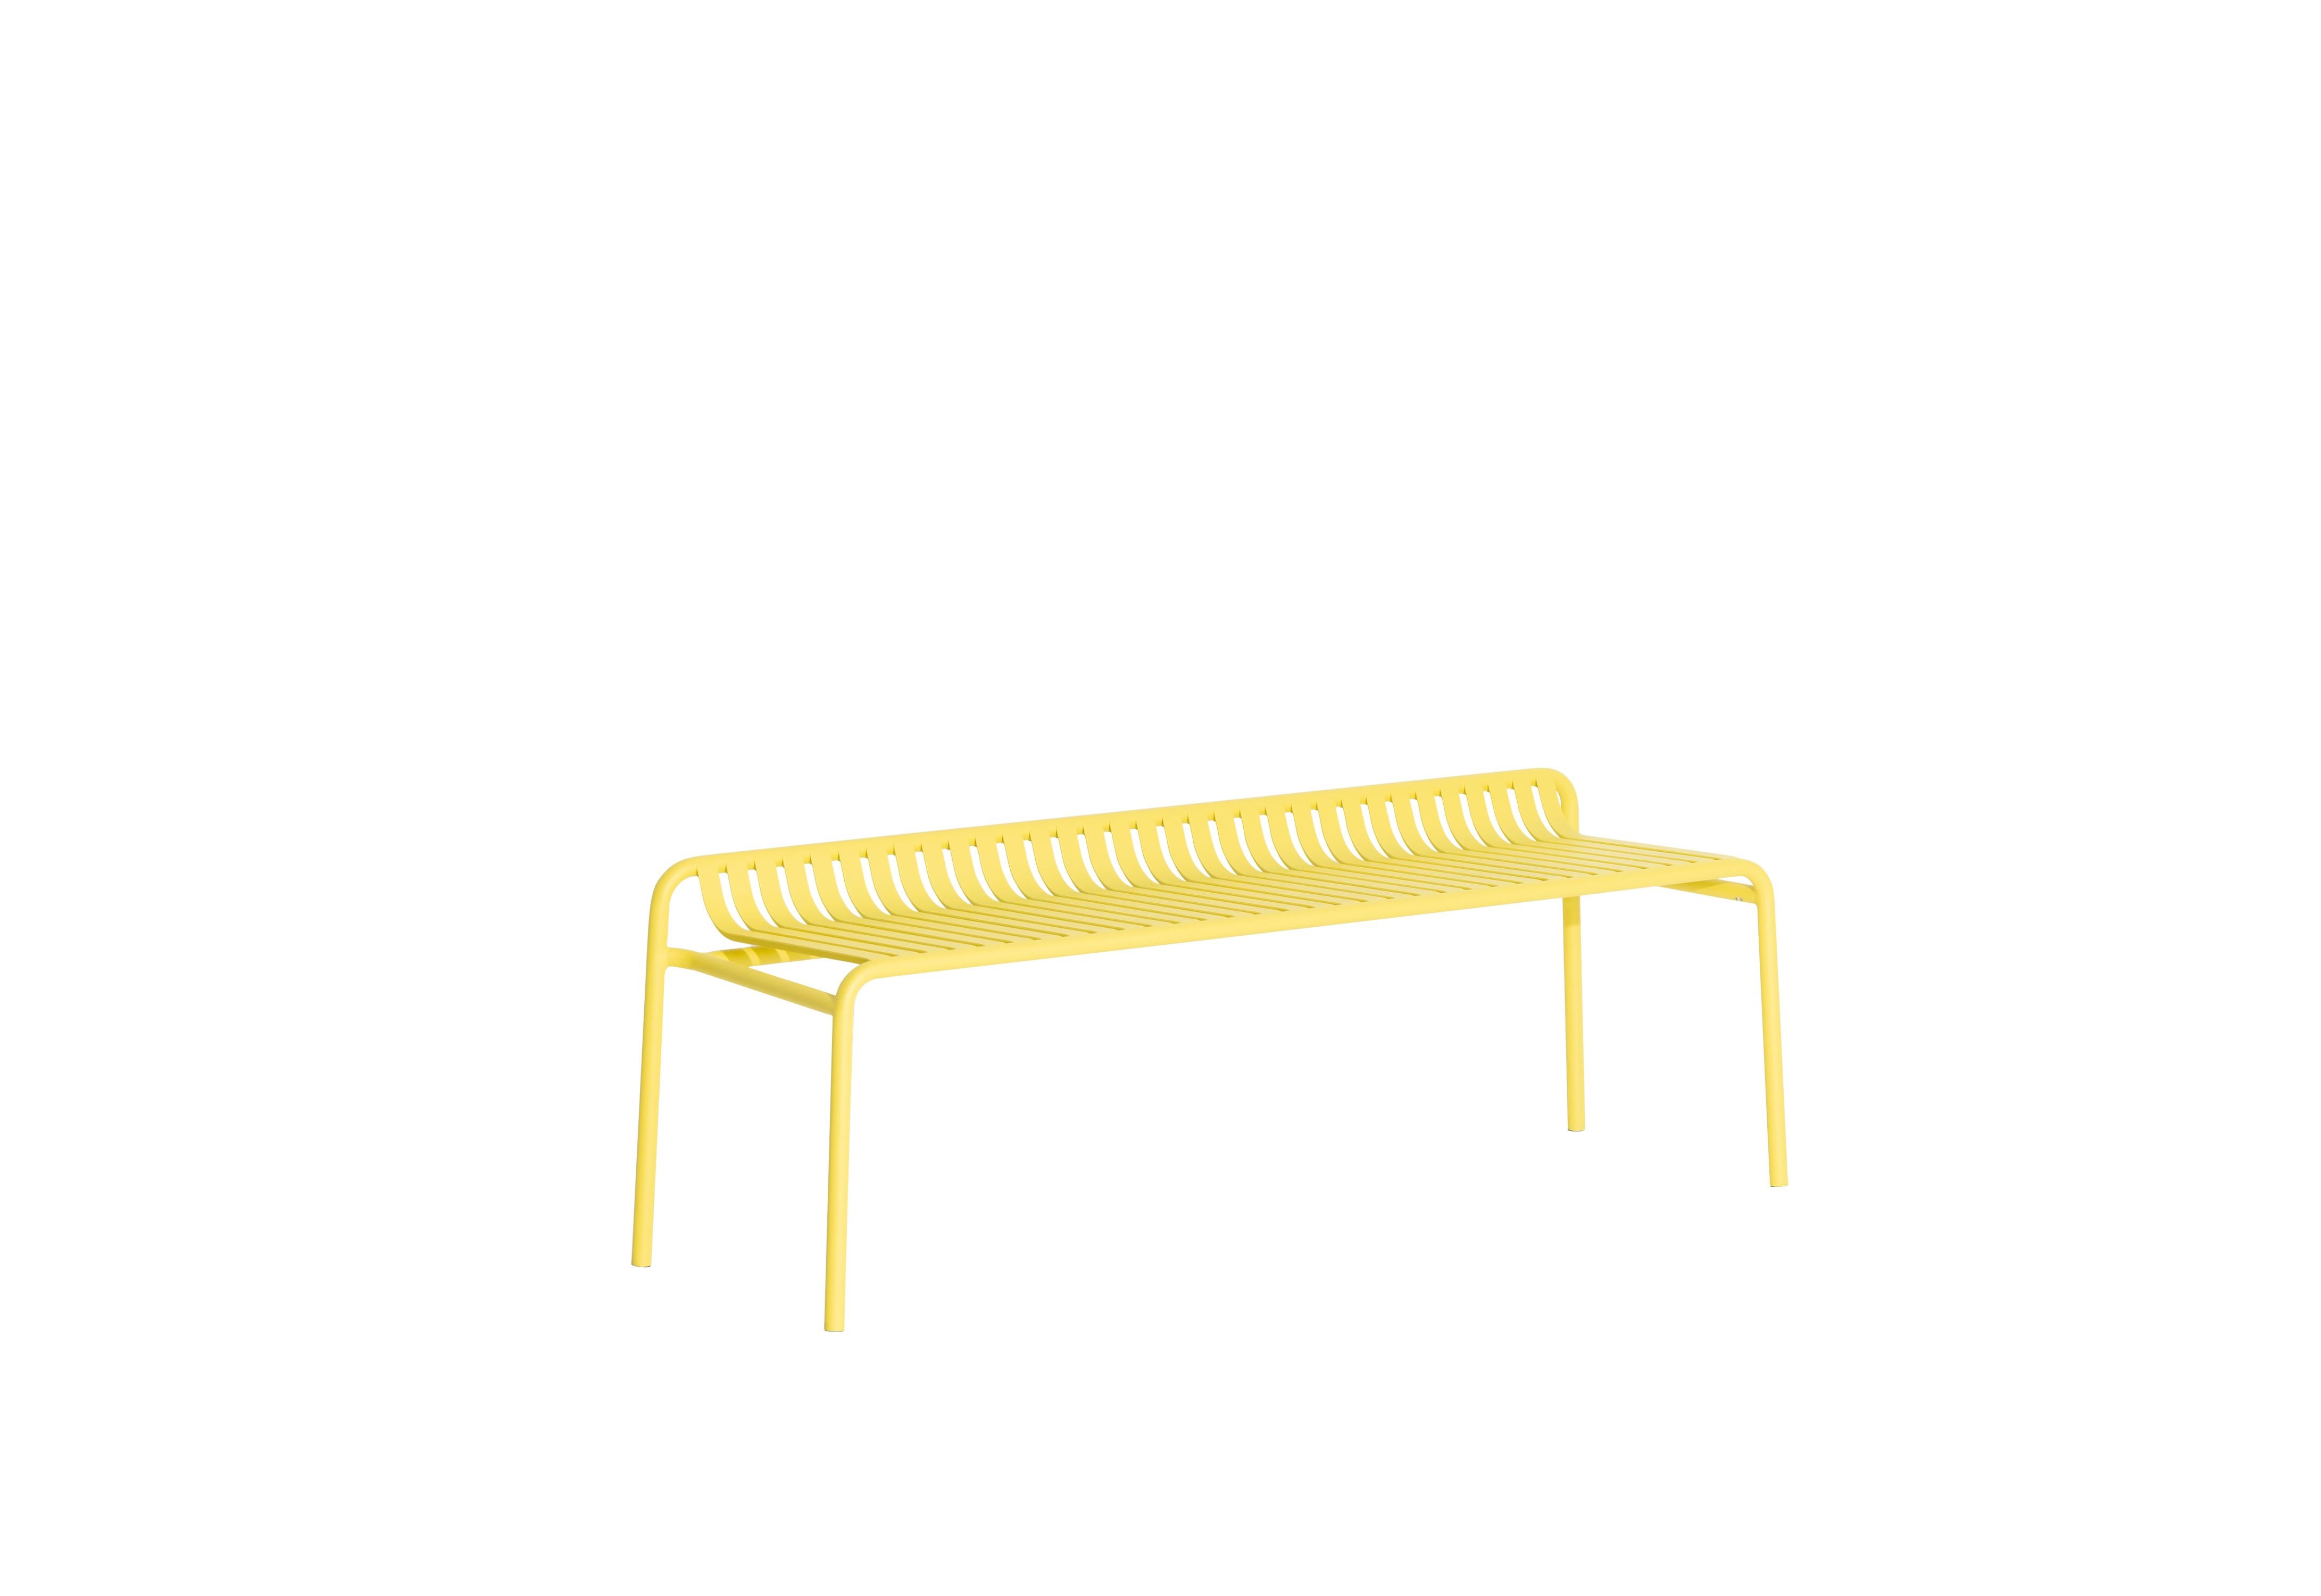 Petite Friture Week-End Bench without Back in Yellow Aluminium by Studio BrichetZiegler, 2017

The week-end collection is a full range of outdoor furniture, in aluminium grained epoxy paint, matt finish, that includes 18 functions and 8 colours